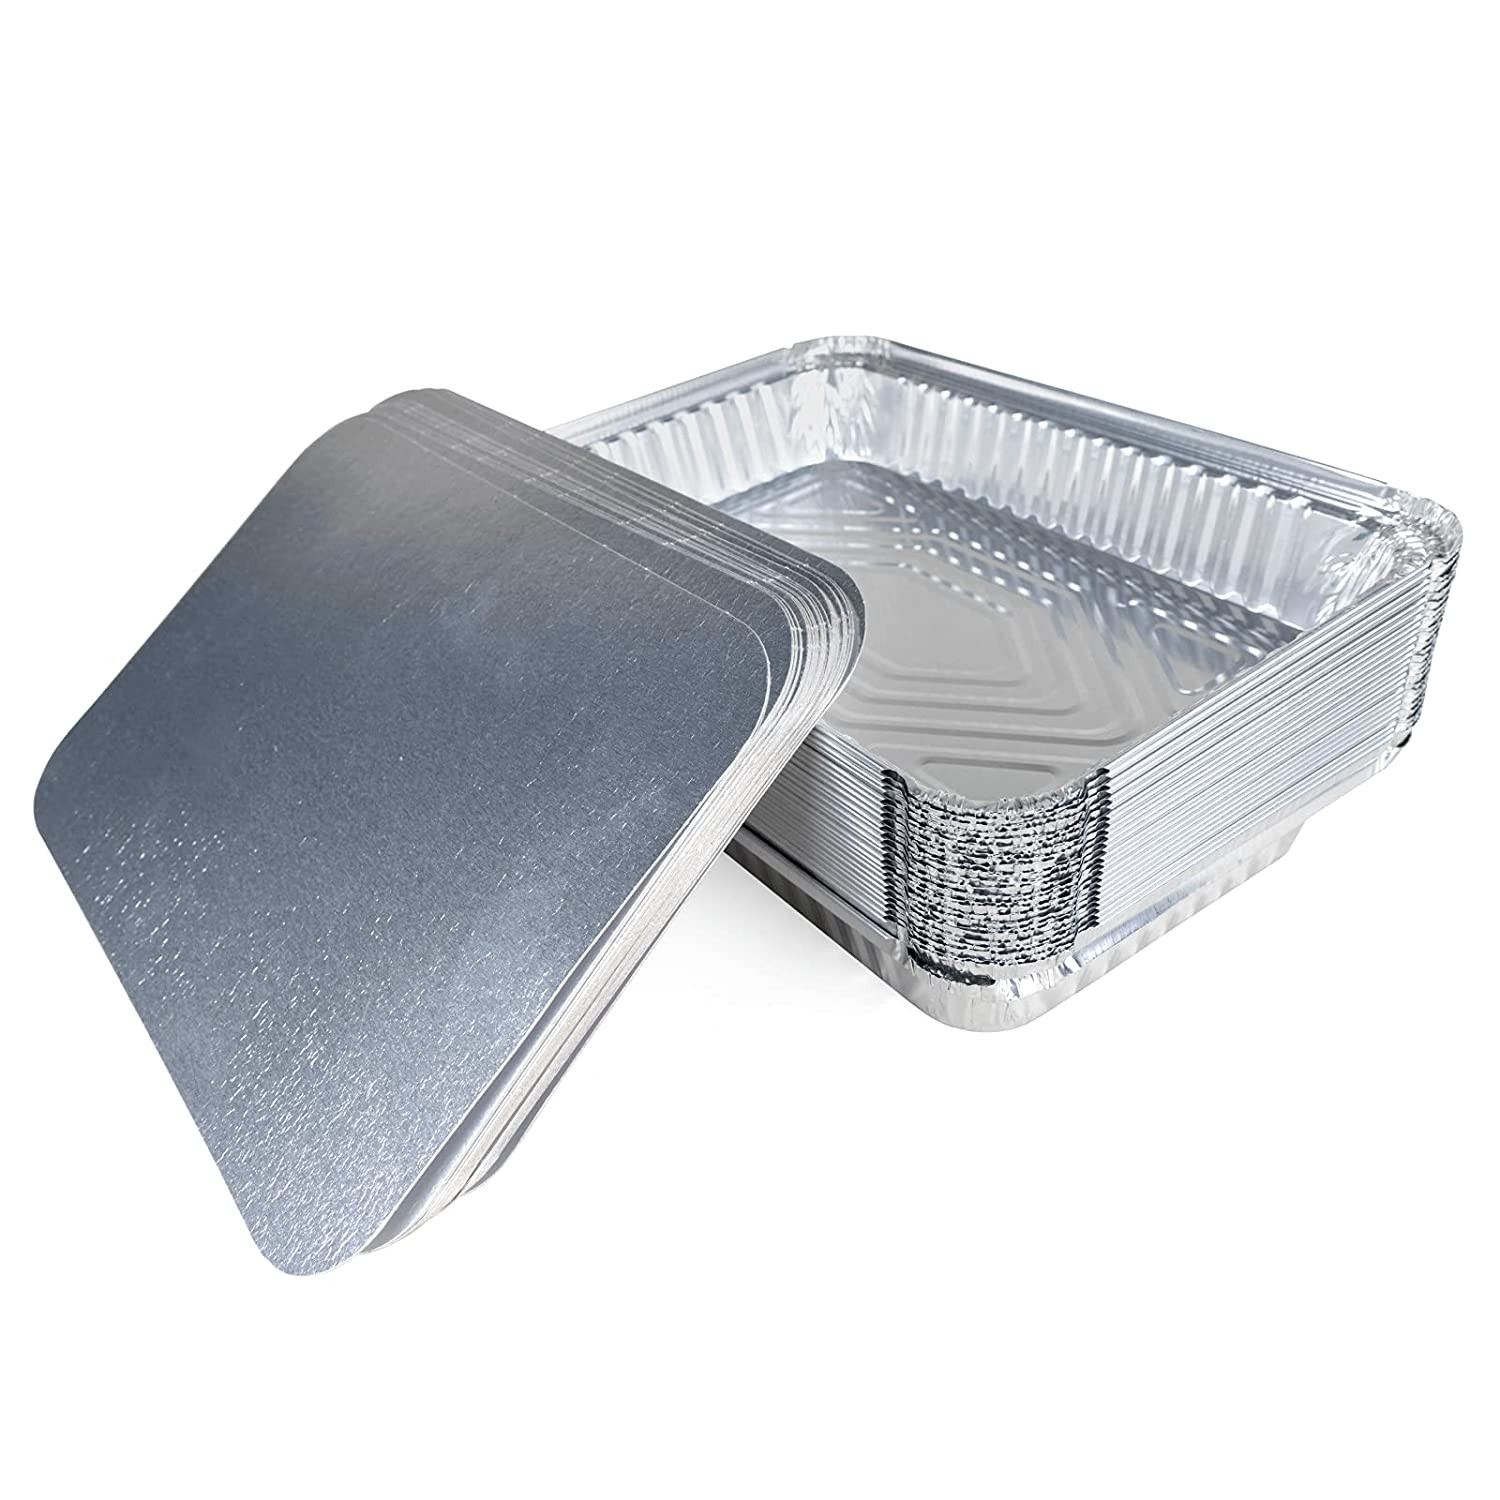 https://idlpack.com/image/cache/catalog/Products/Foil%20Pans%20and%20Trays/71P2g3OisQL._SL1500_-1500x1500.jpg